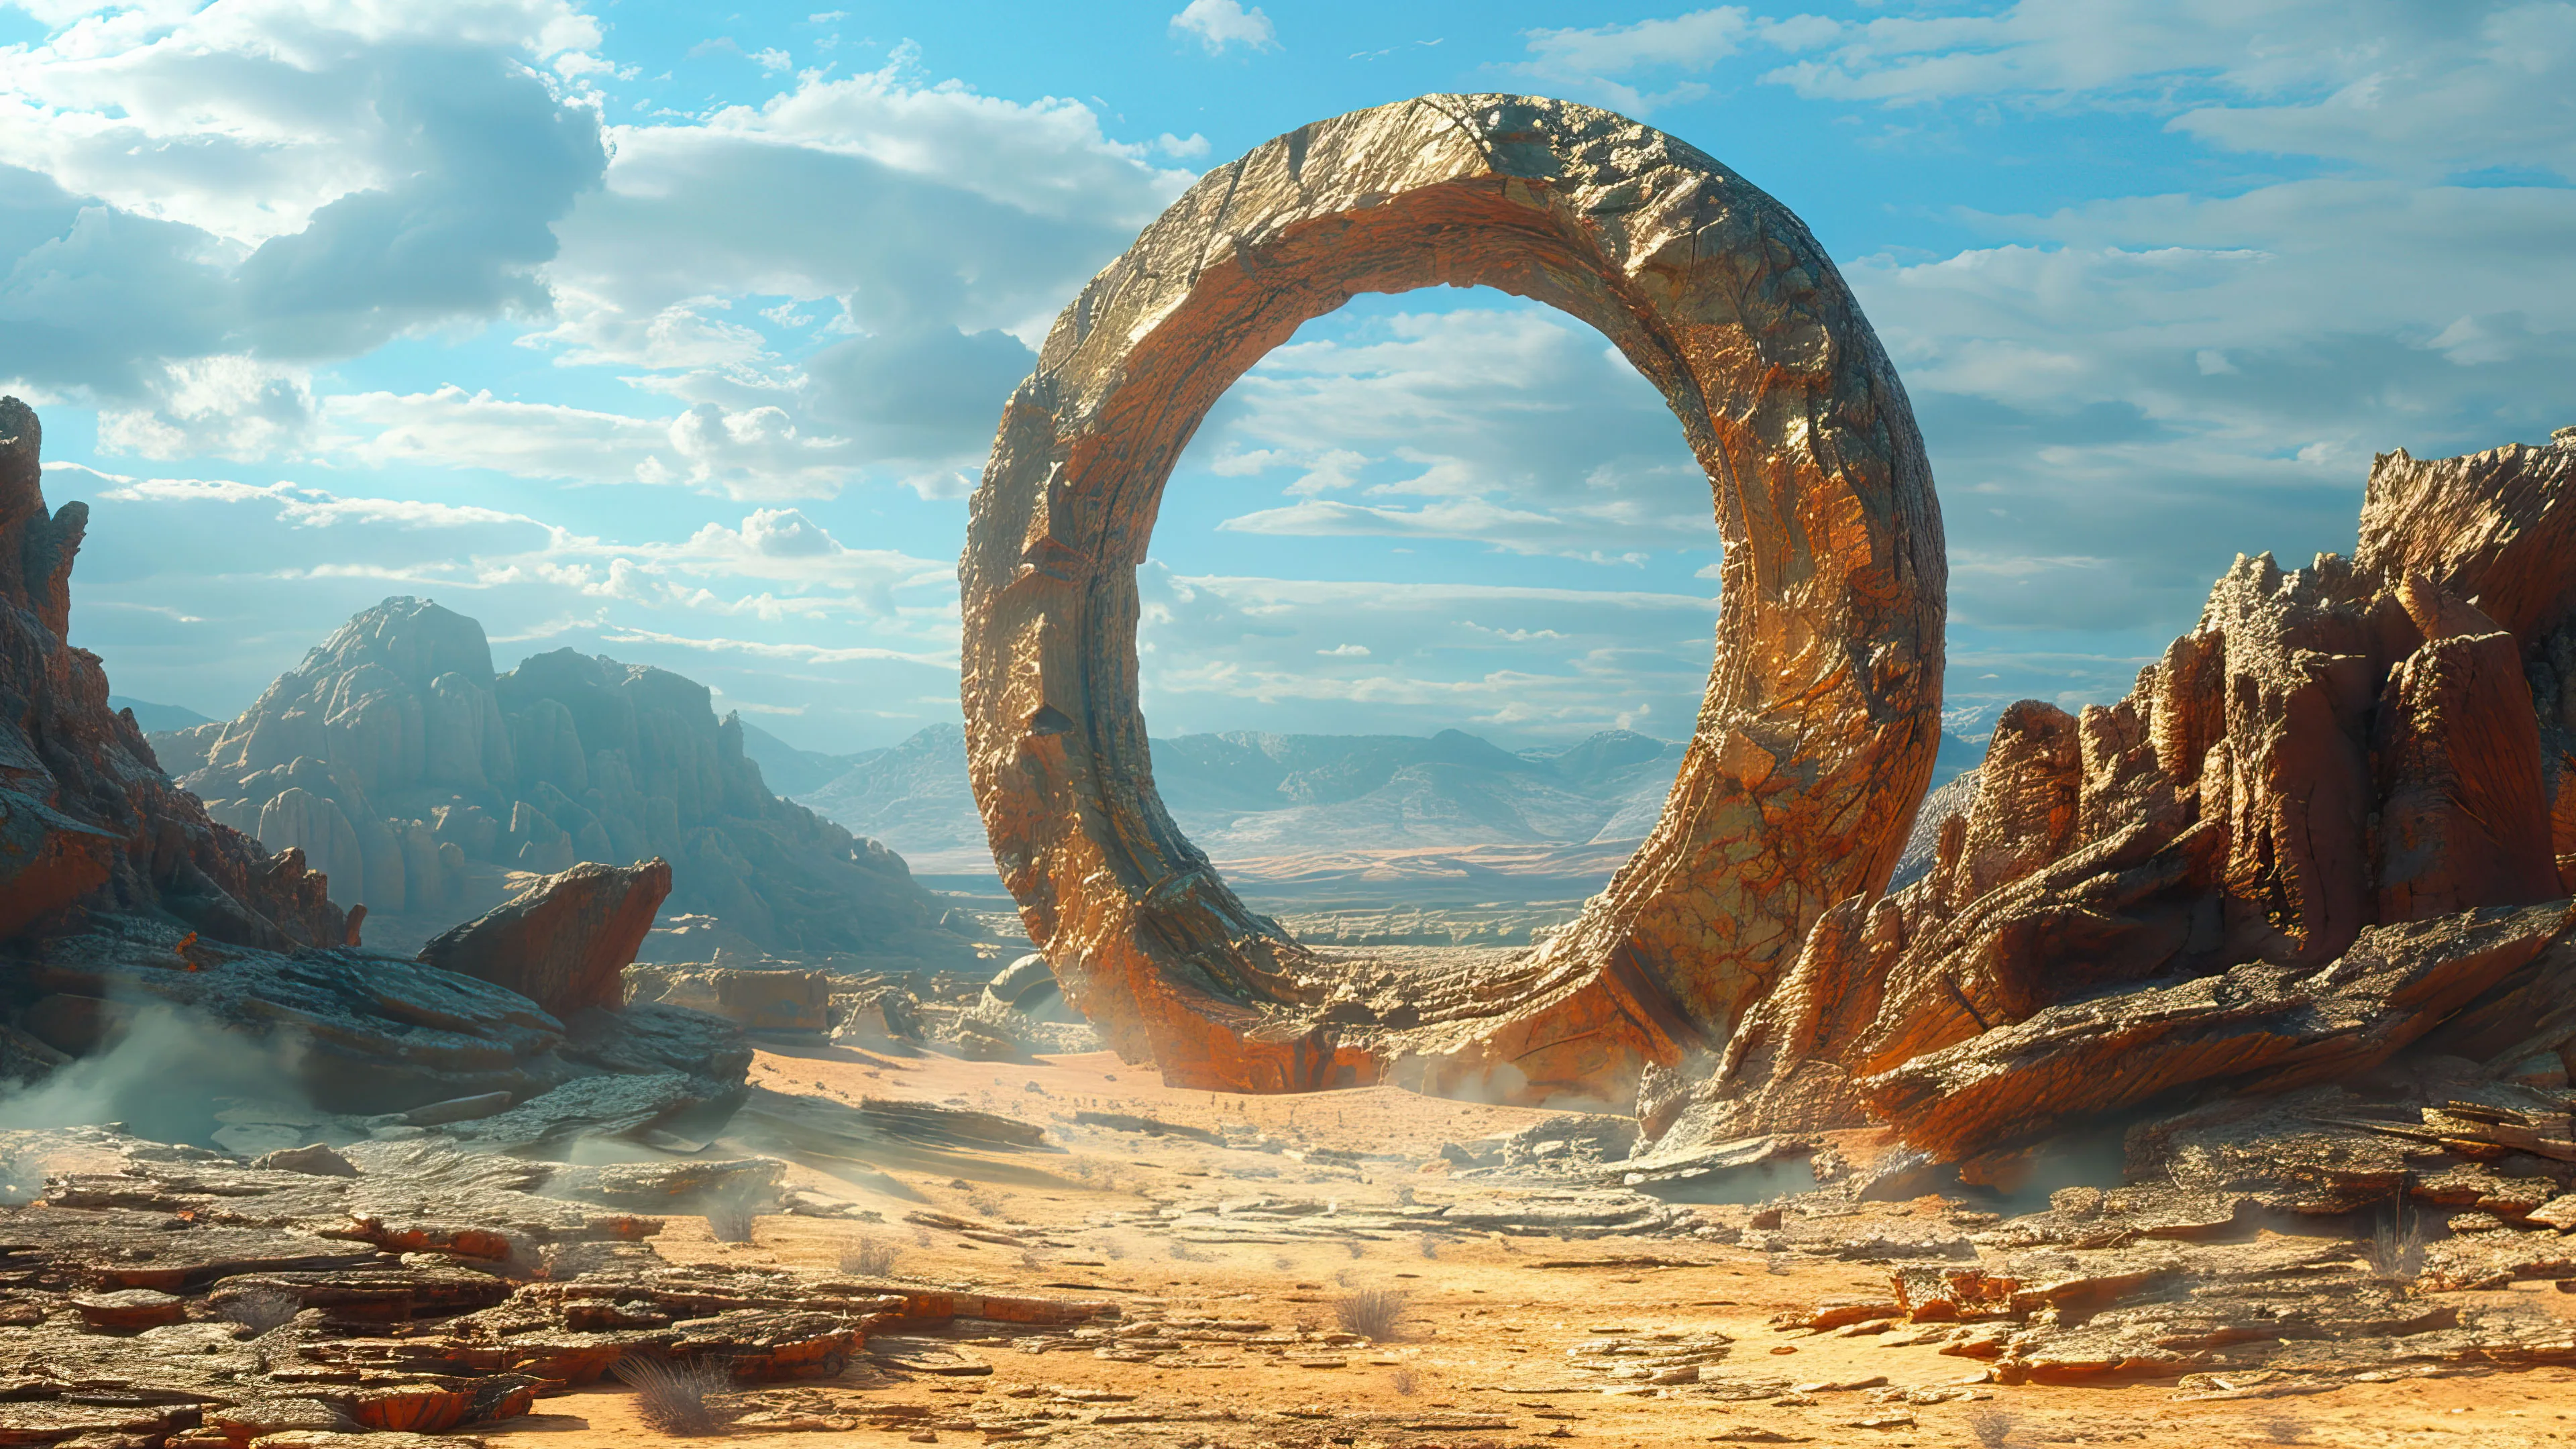 A mesmerizing 4K wallpaper presents a mystical desert gateway, shrouded in enigmatic allure. Towering sand dunes stretch into the distance beneath a vast, swirling sky.